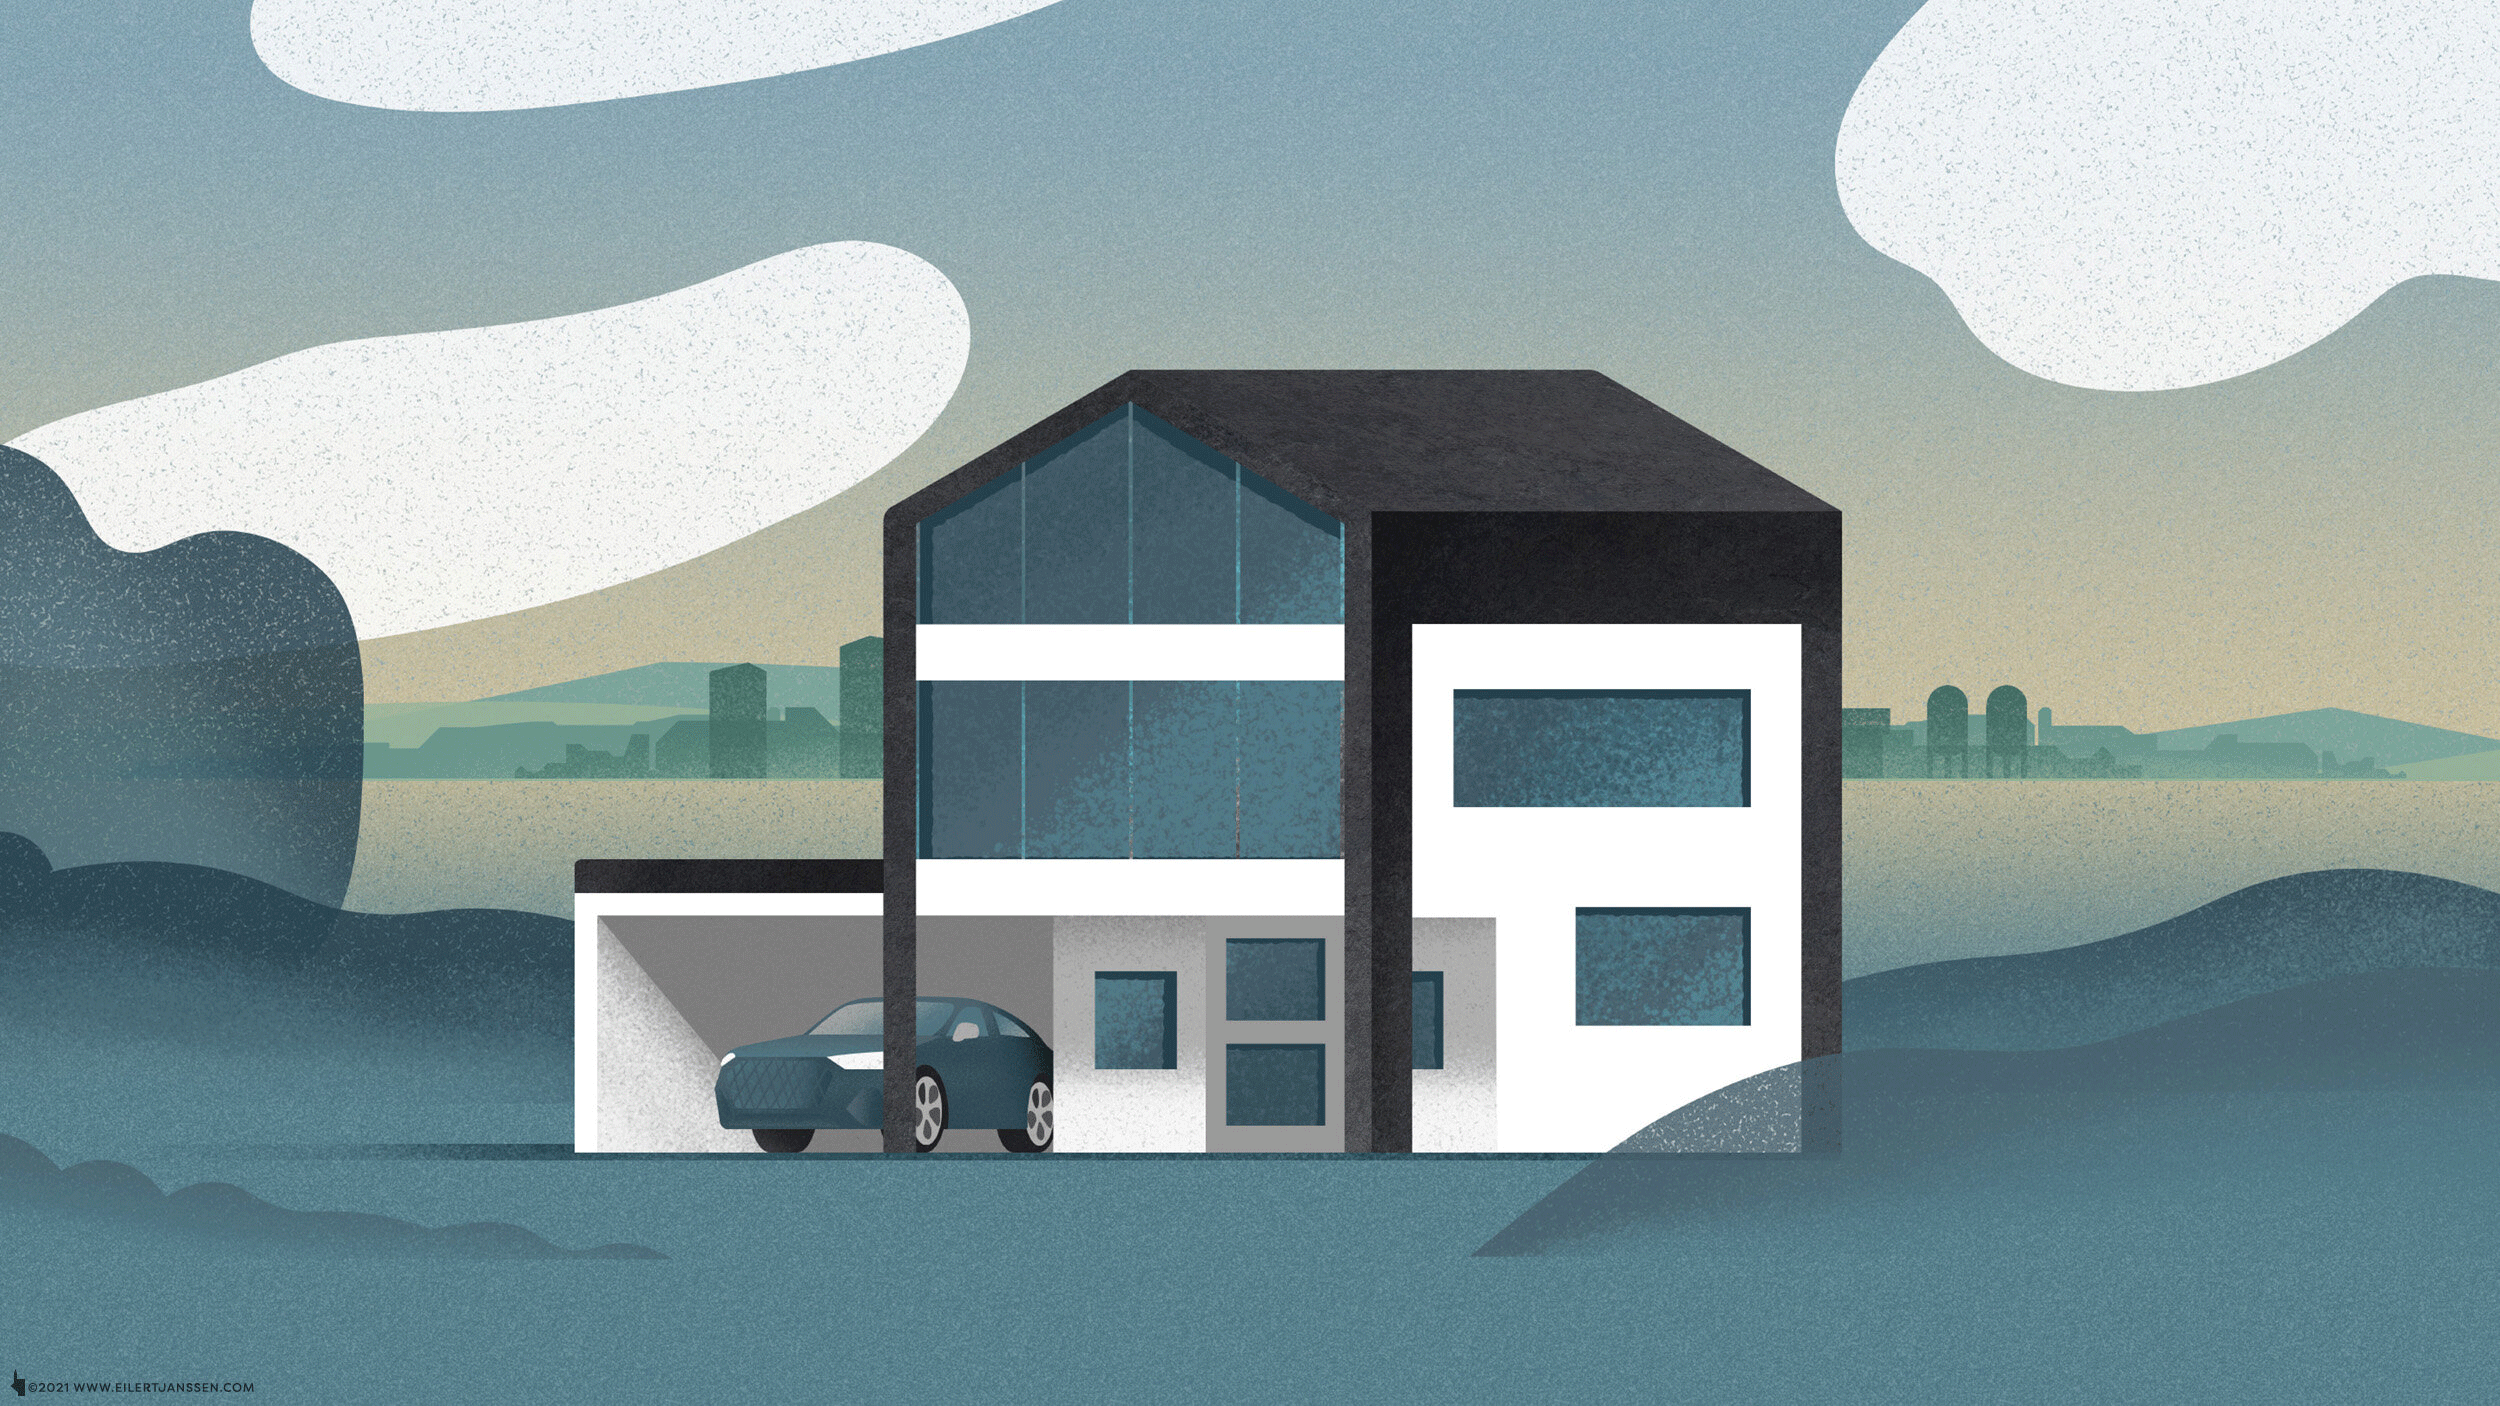 Editorial Illustration - The House